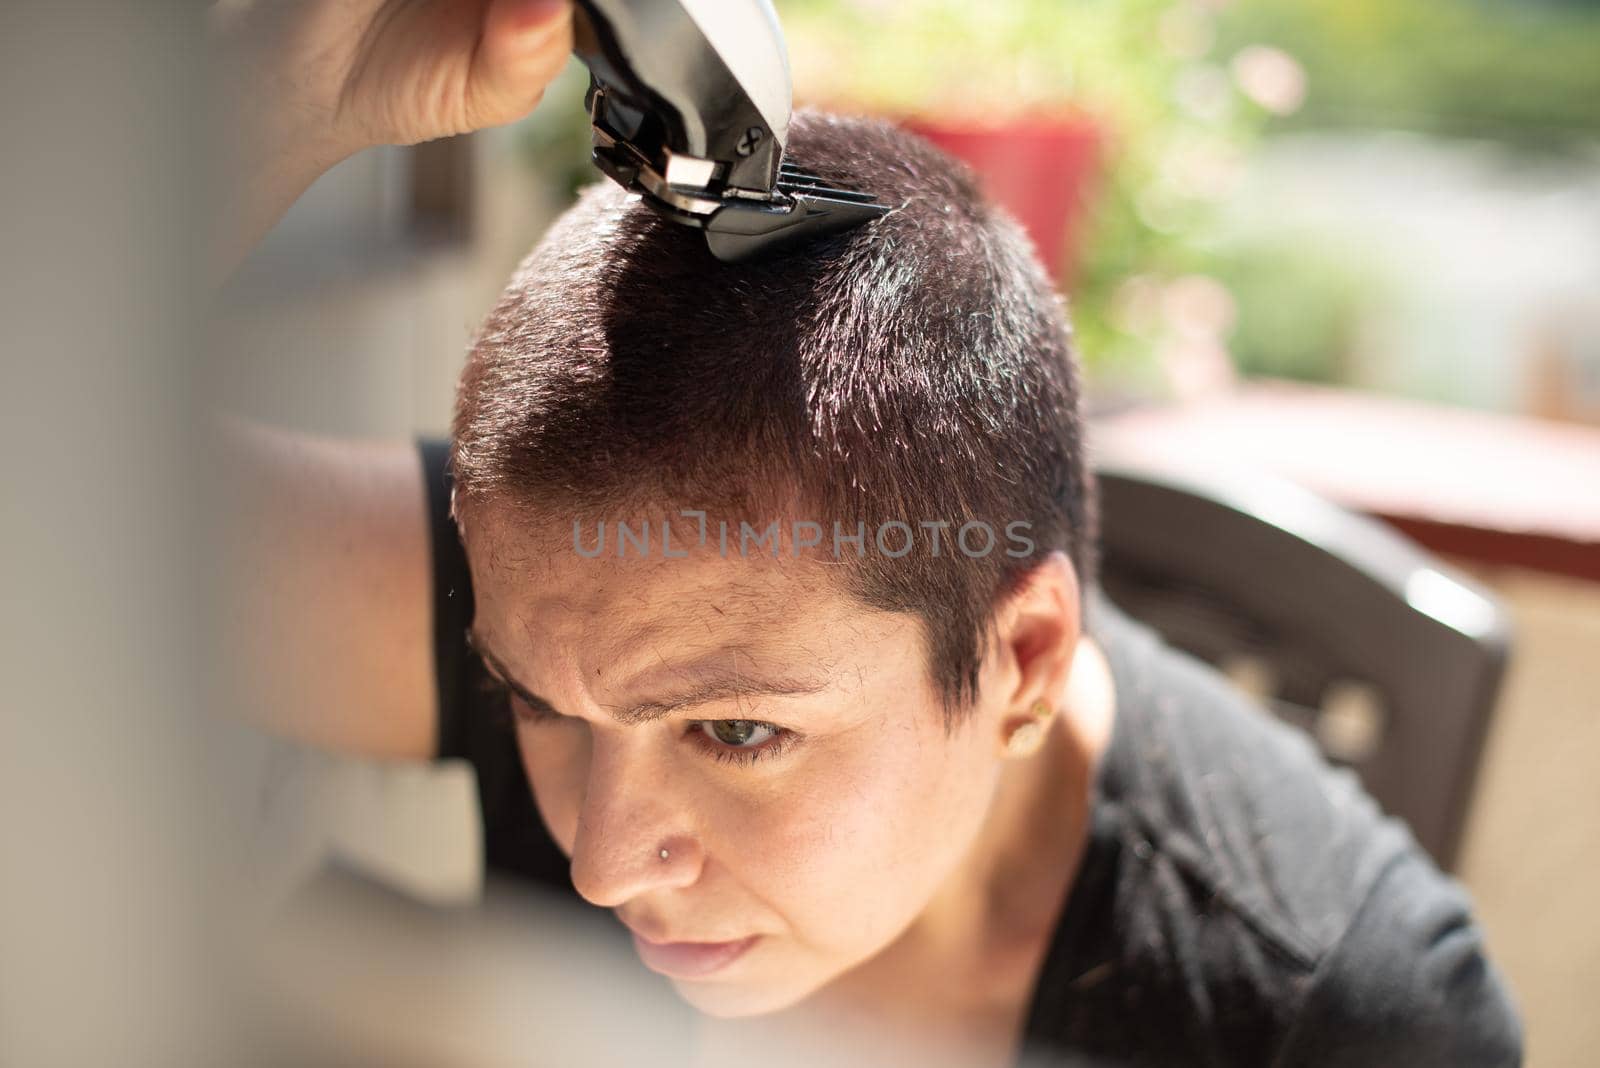 worried young woman shaving your head with a razor at home life style by FranciscoStockLife